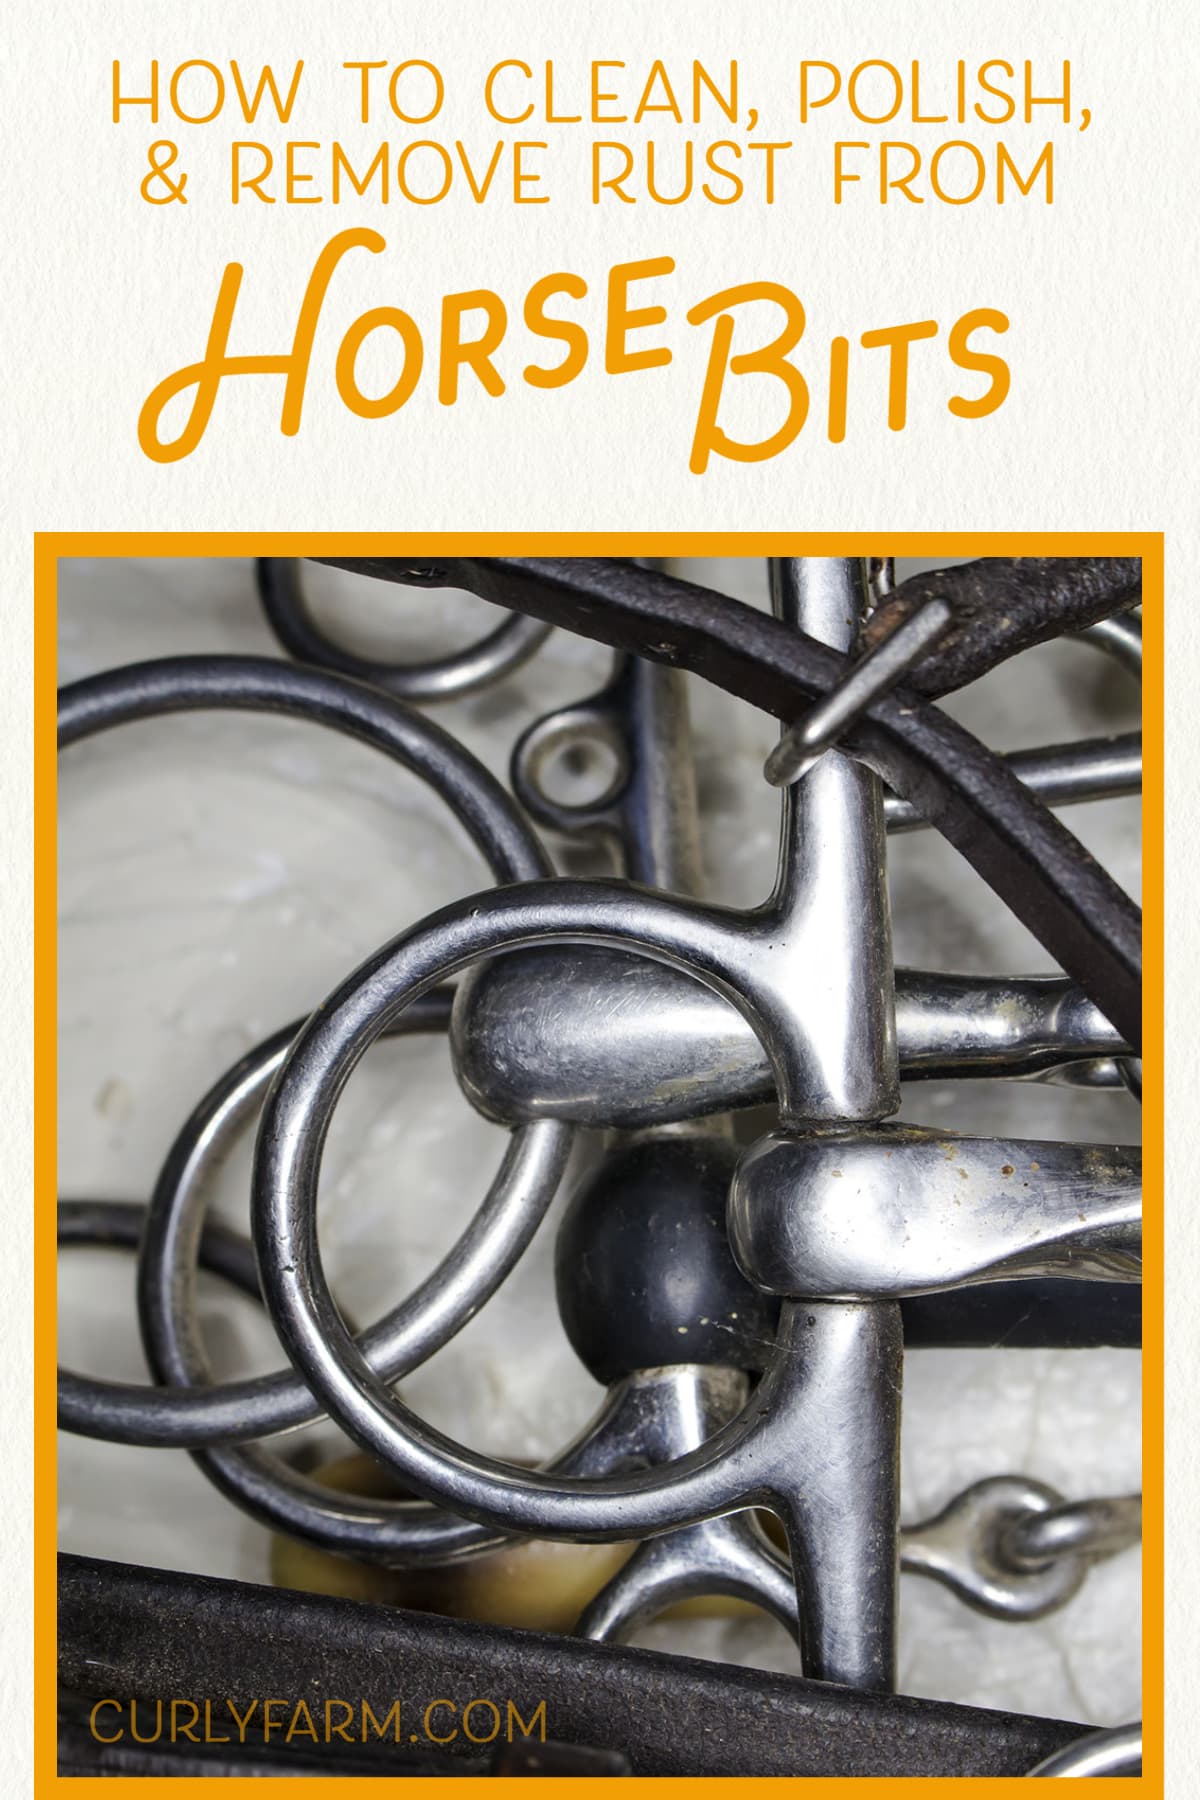 A clean horse bit doesn't just look good – it works better. Learn how to clean, polish, and remove rust from horse bits.